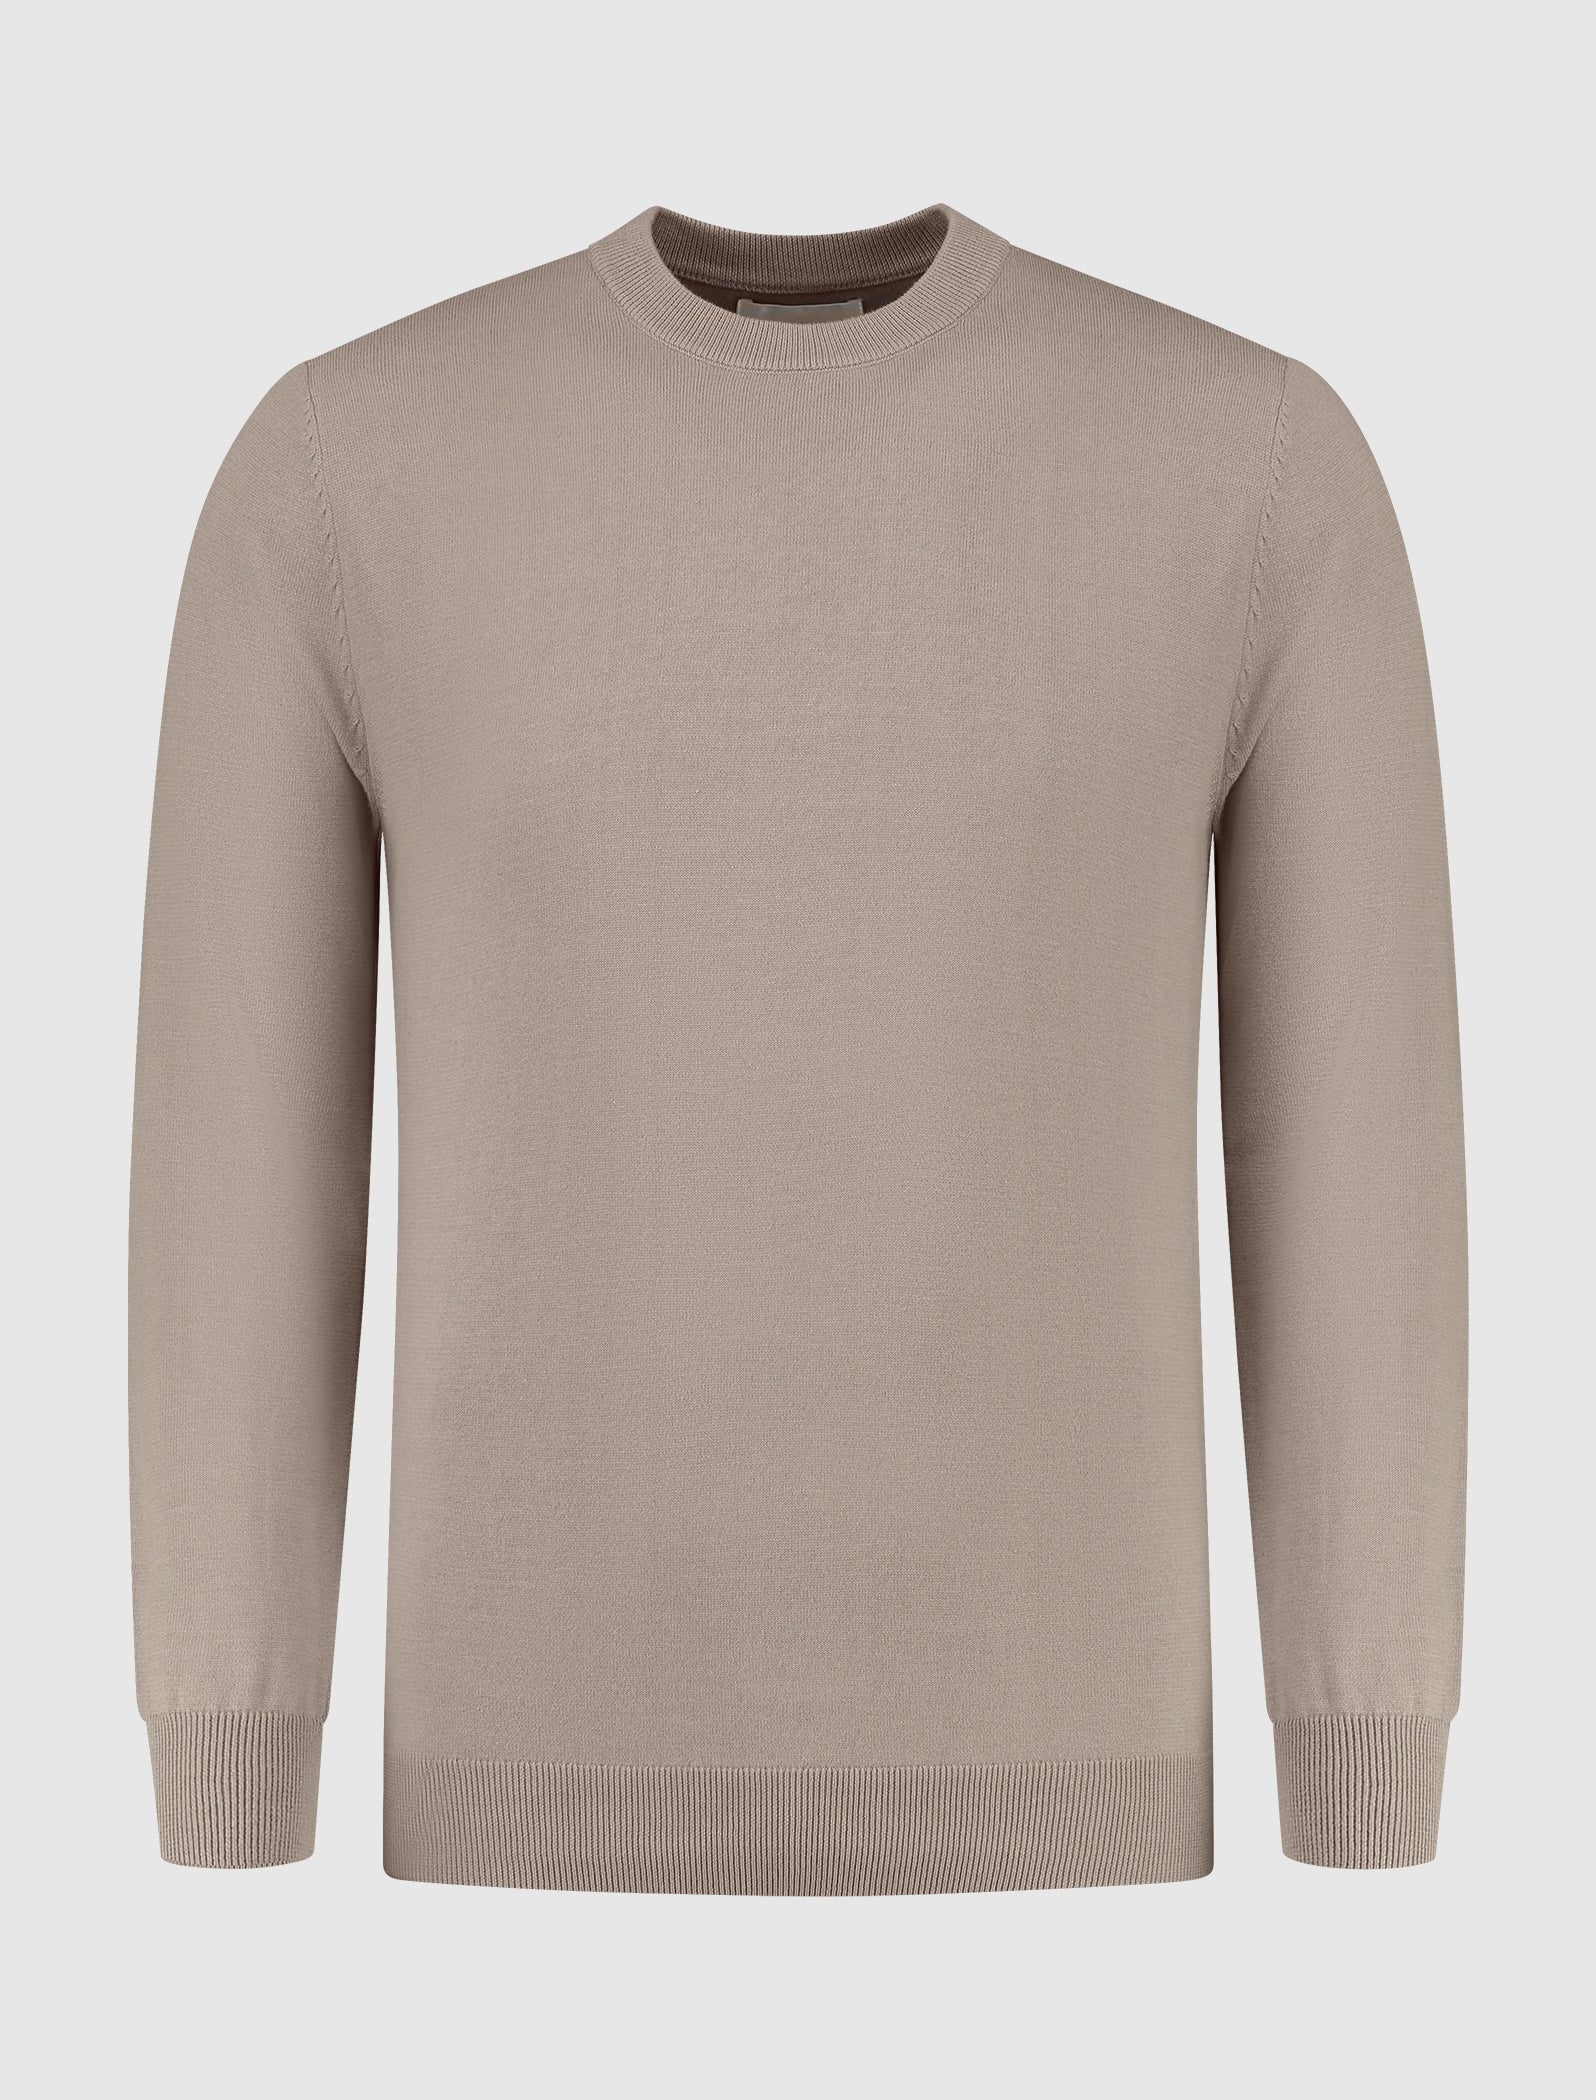 Essential Knitwear Crewneck Sweater | Taupe